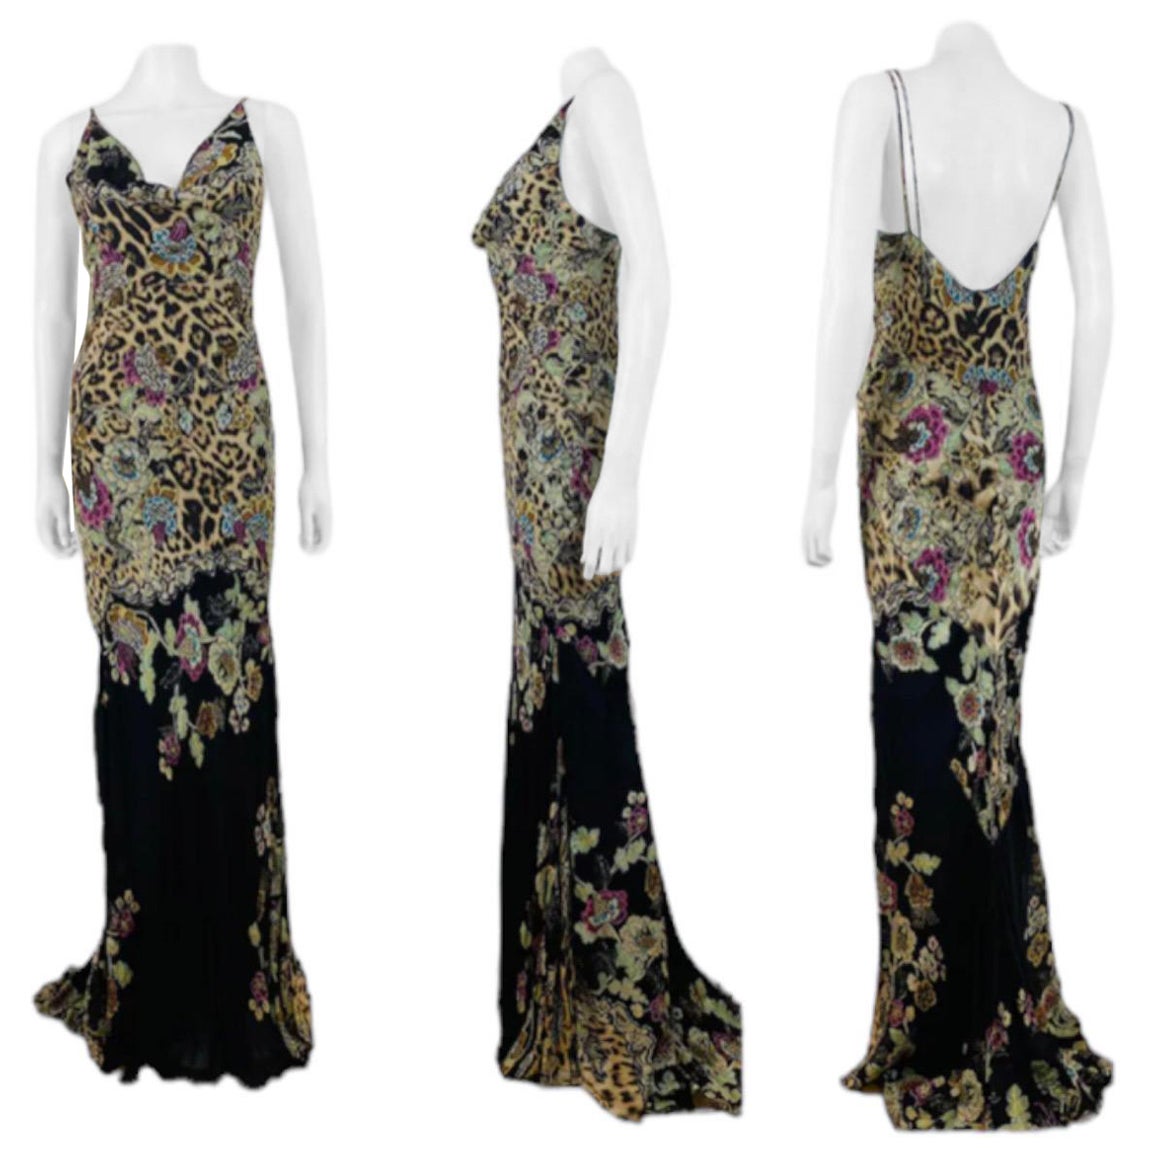 Stunning S/S 2003 Roberto Cavalli Chinoiserie collection dress
Semi sheer silk leopard + floral print fabric over tissue black silk lining
Thin shoulder straps
Draped neckline with weight between bust
Low cut back
Fitted bias cut with stitched